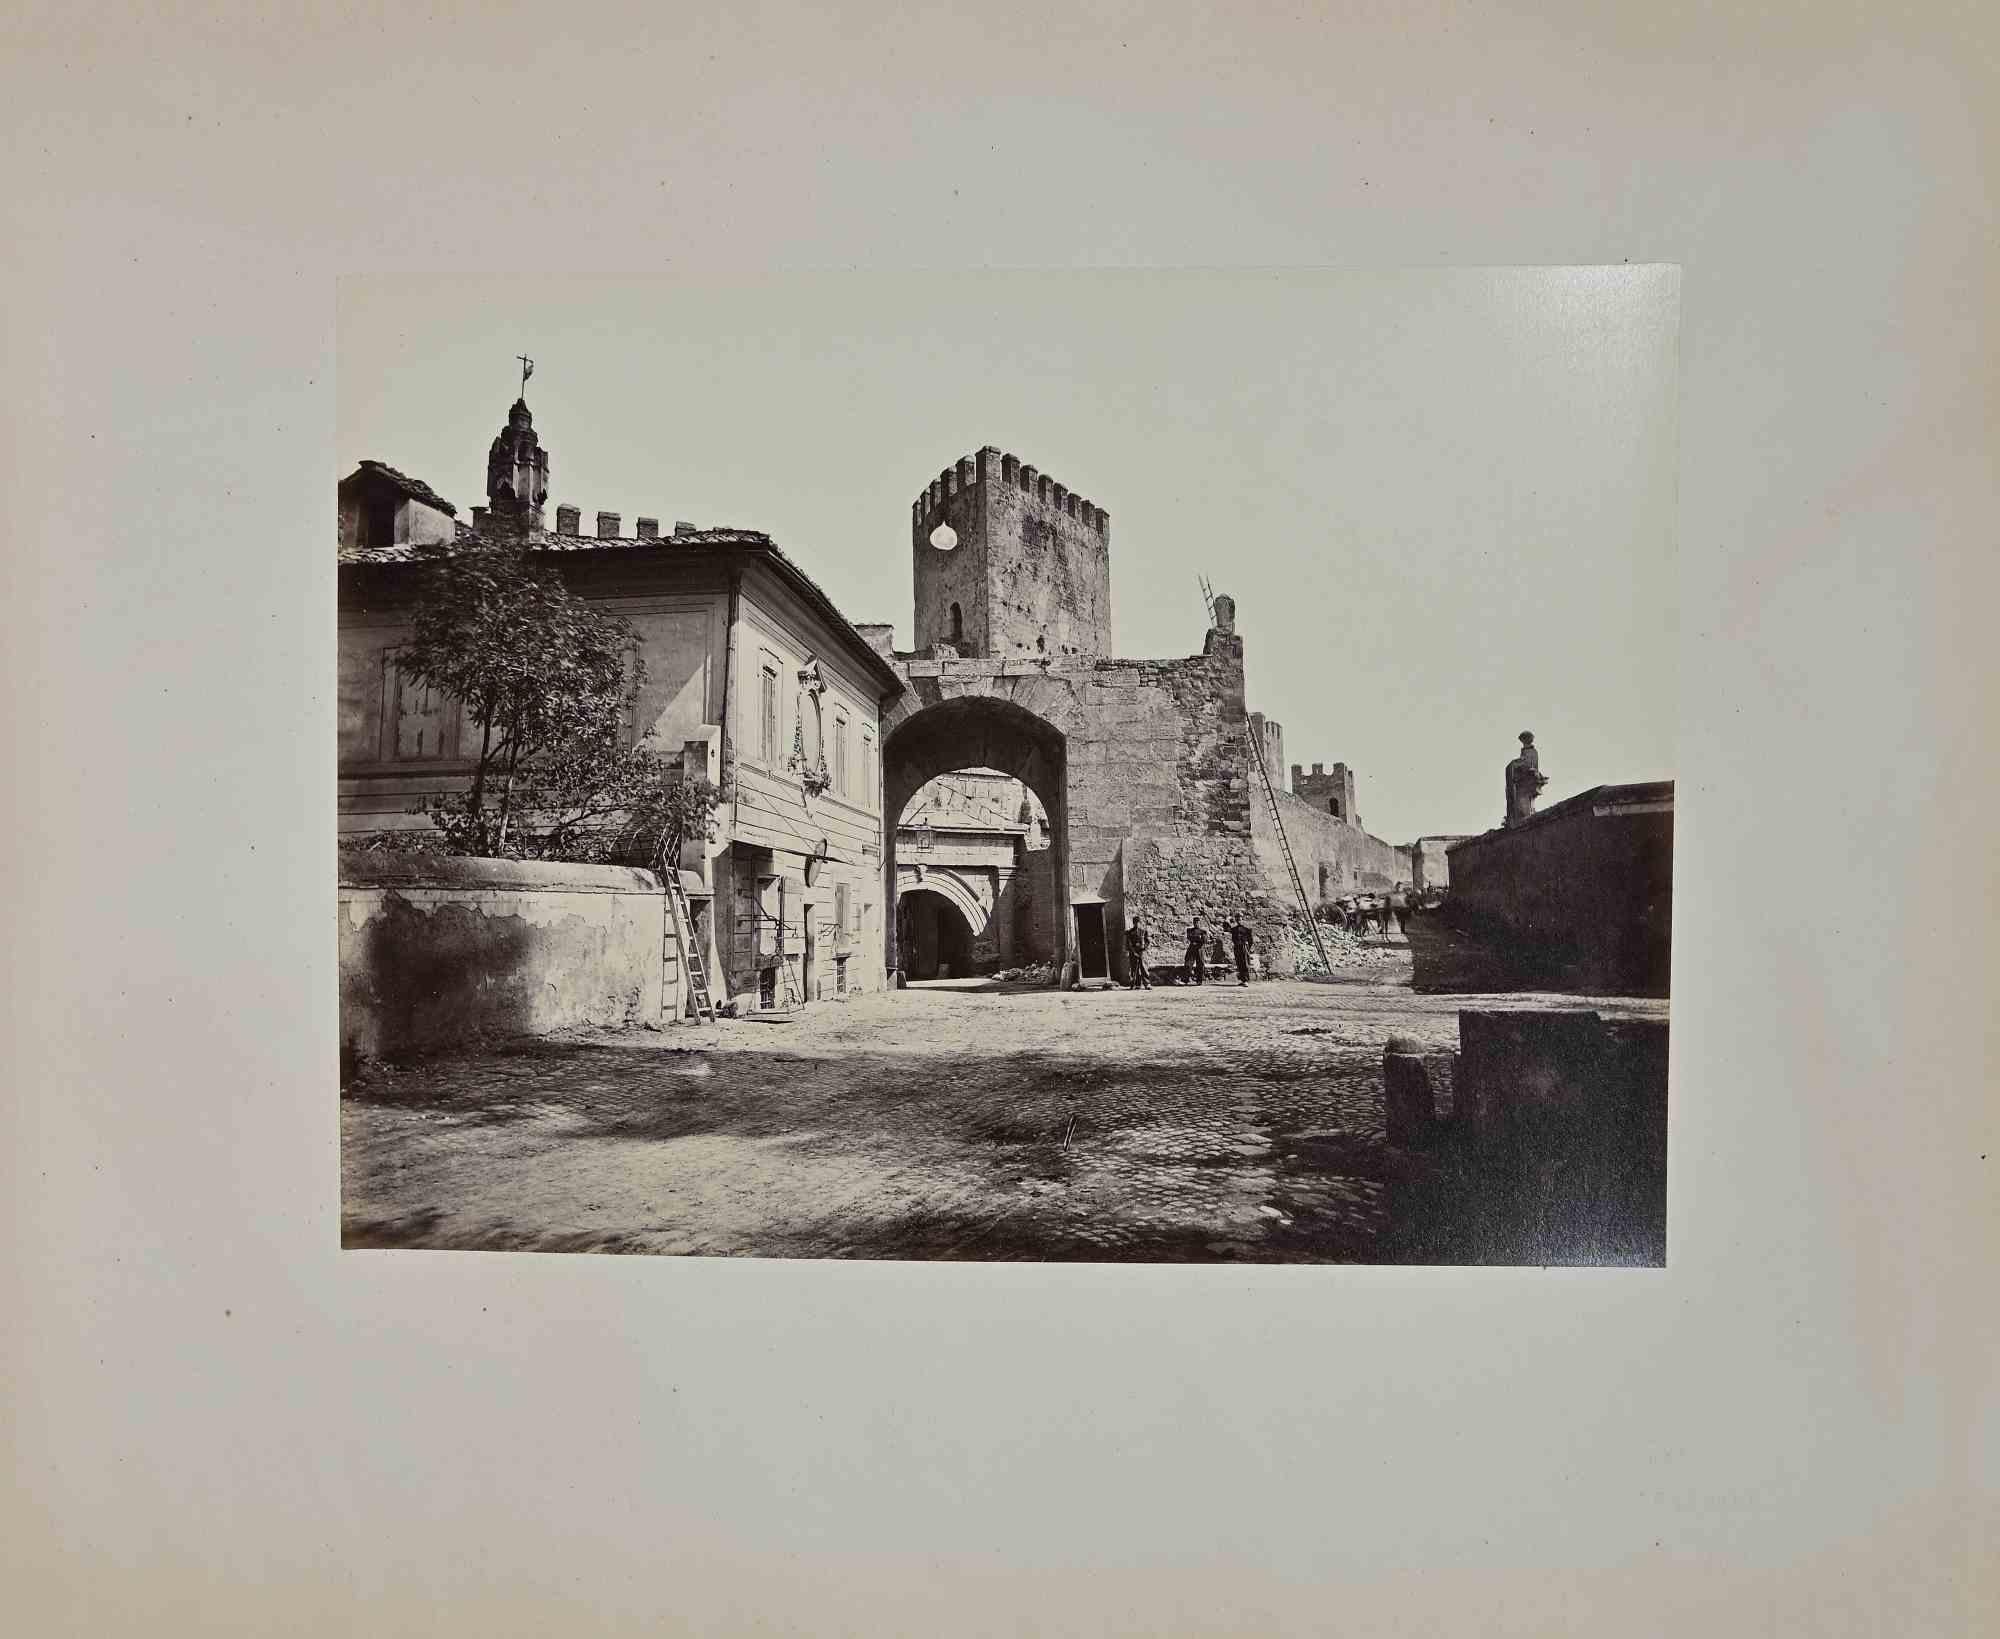 View of Monuments Landscapes Of Rome is a Vintage Photograph in black and white on paper realized by Francesco Sidoli photographer in the late 19th Century.

Good condition.